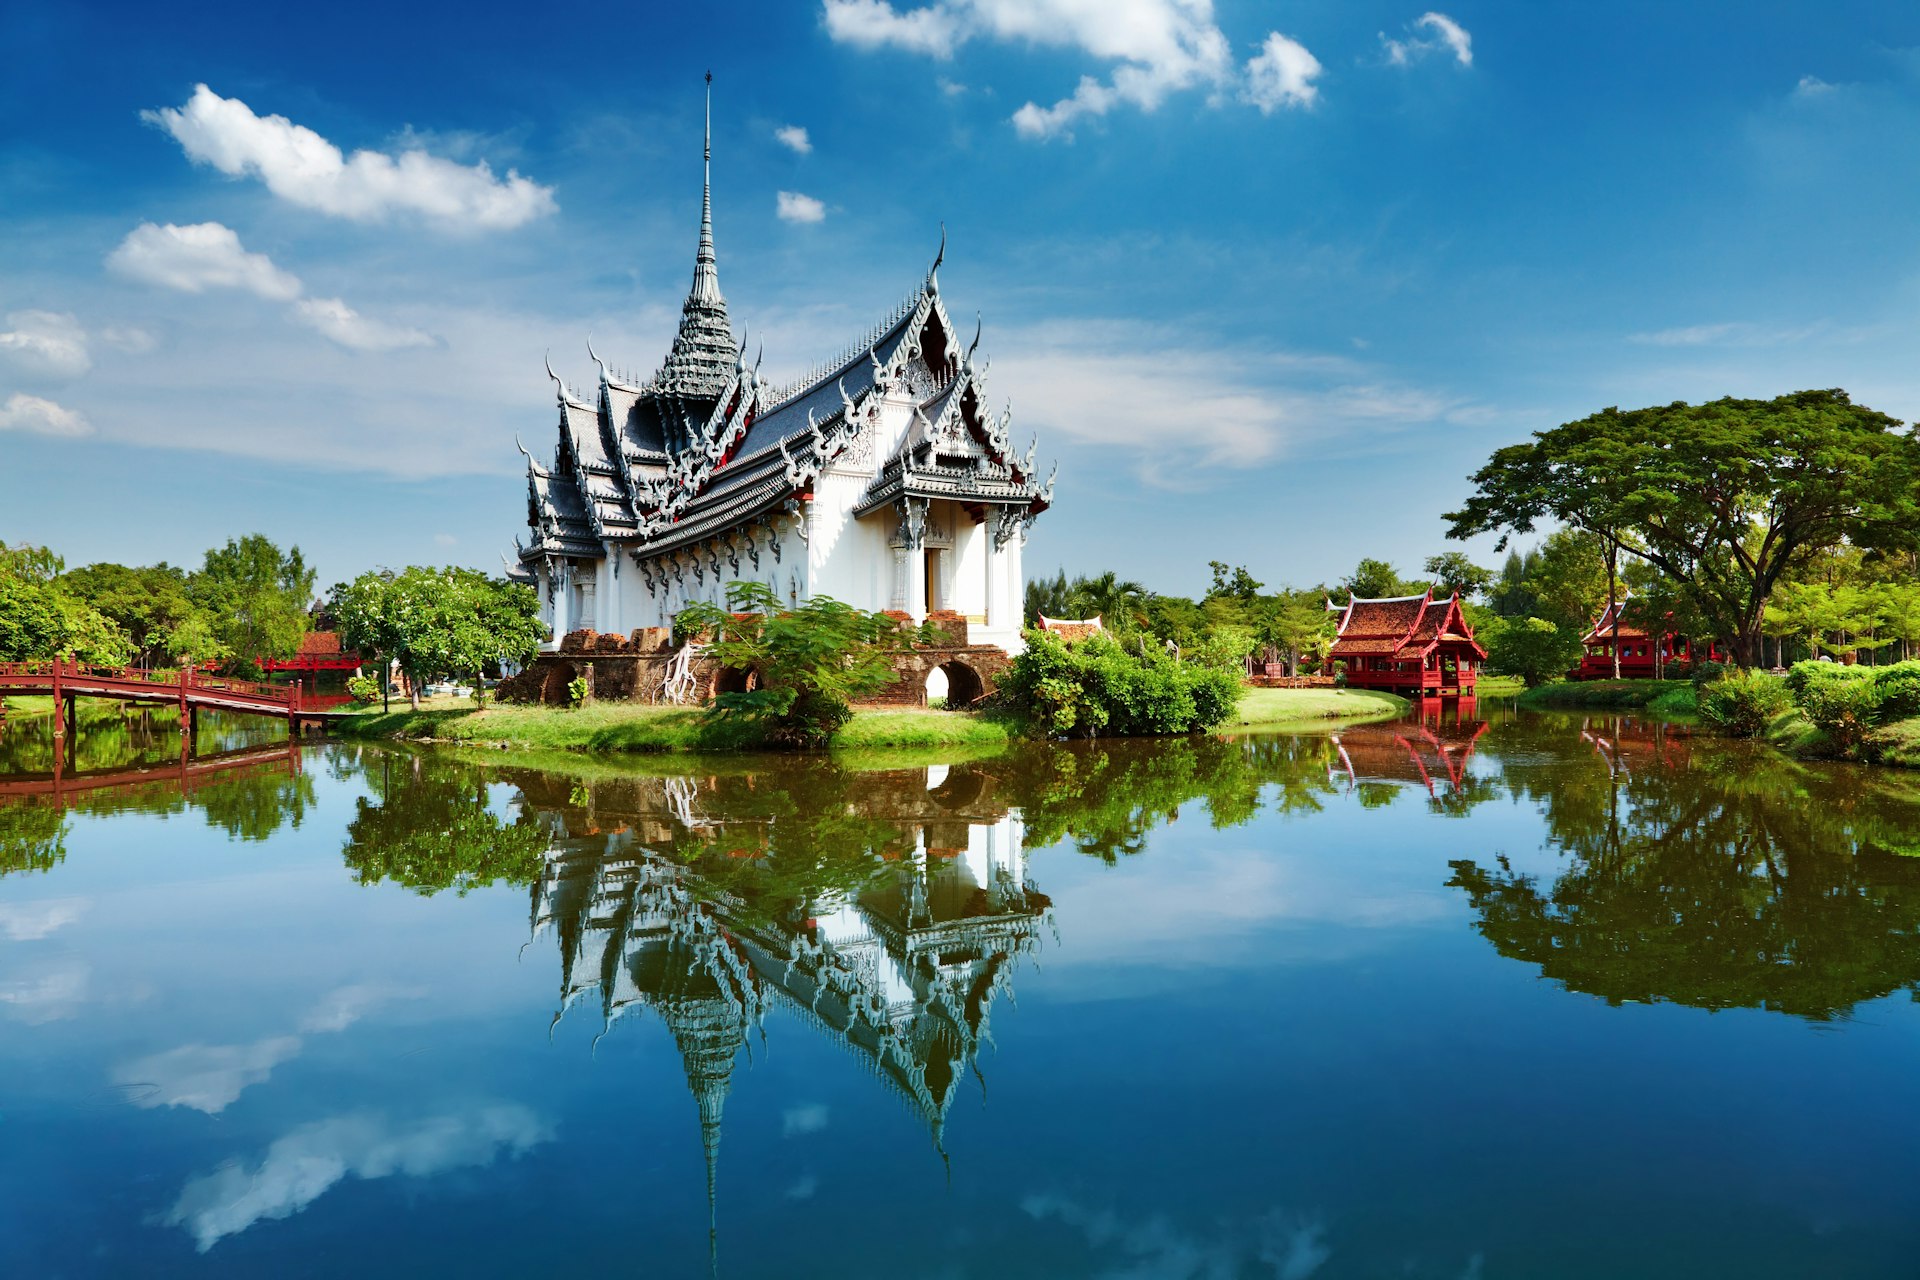 The white, several-tiered Sanphet Prasat Palace sits above a peaceful lake in the Ancient City on the outskirts of Bangkok